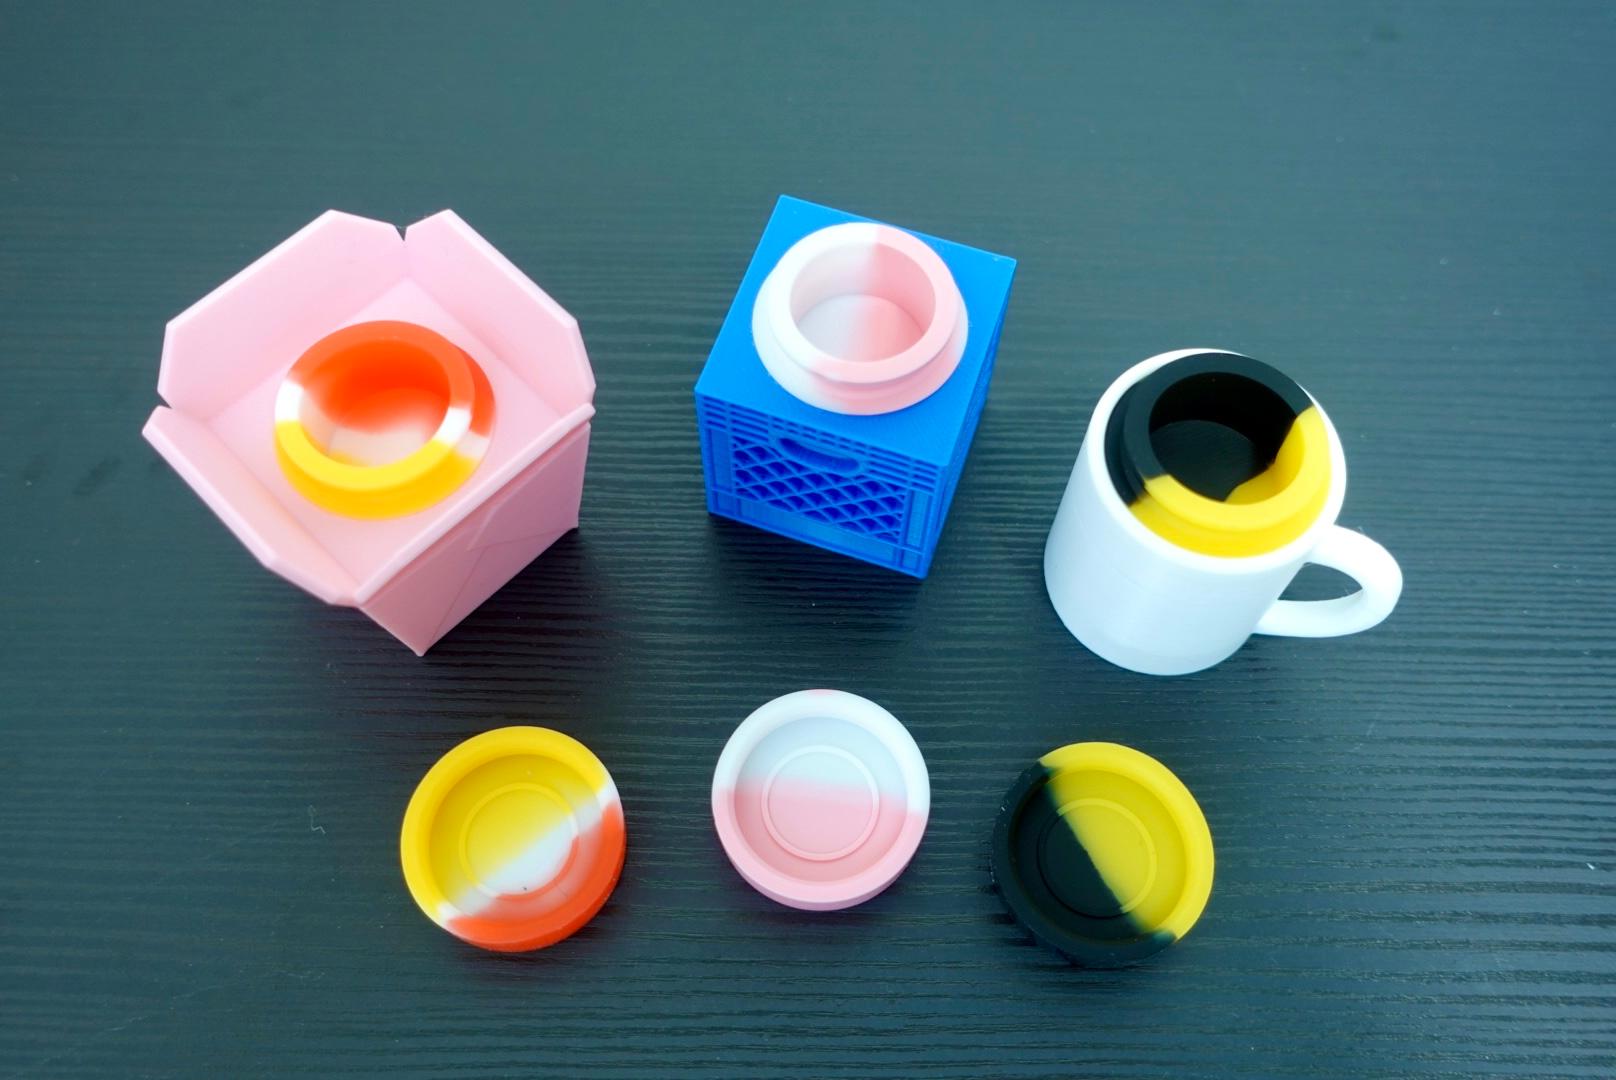 5ml Silicone Containers (Mini Crate, Takeout Box, Coffee Mug) 3d model